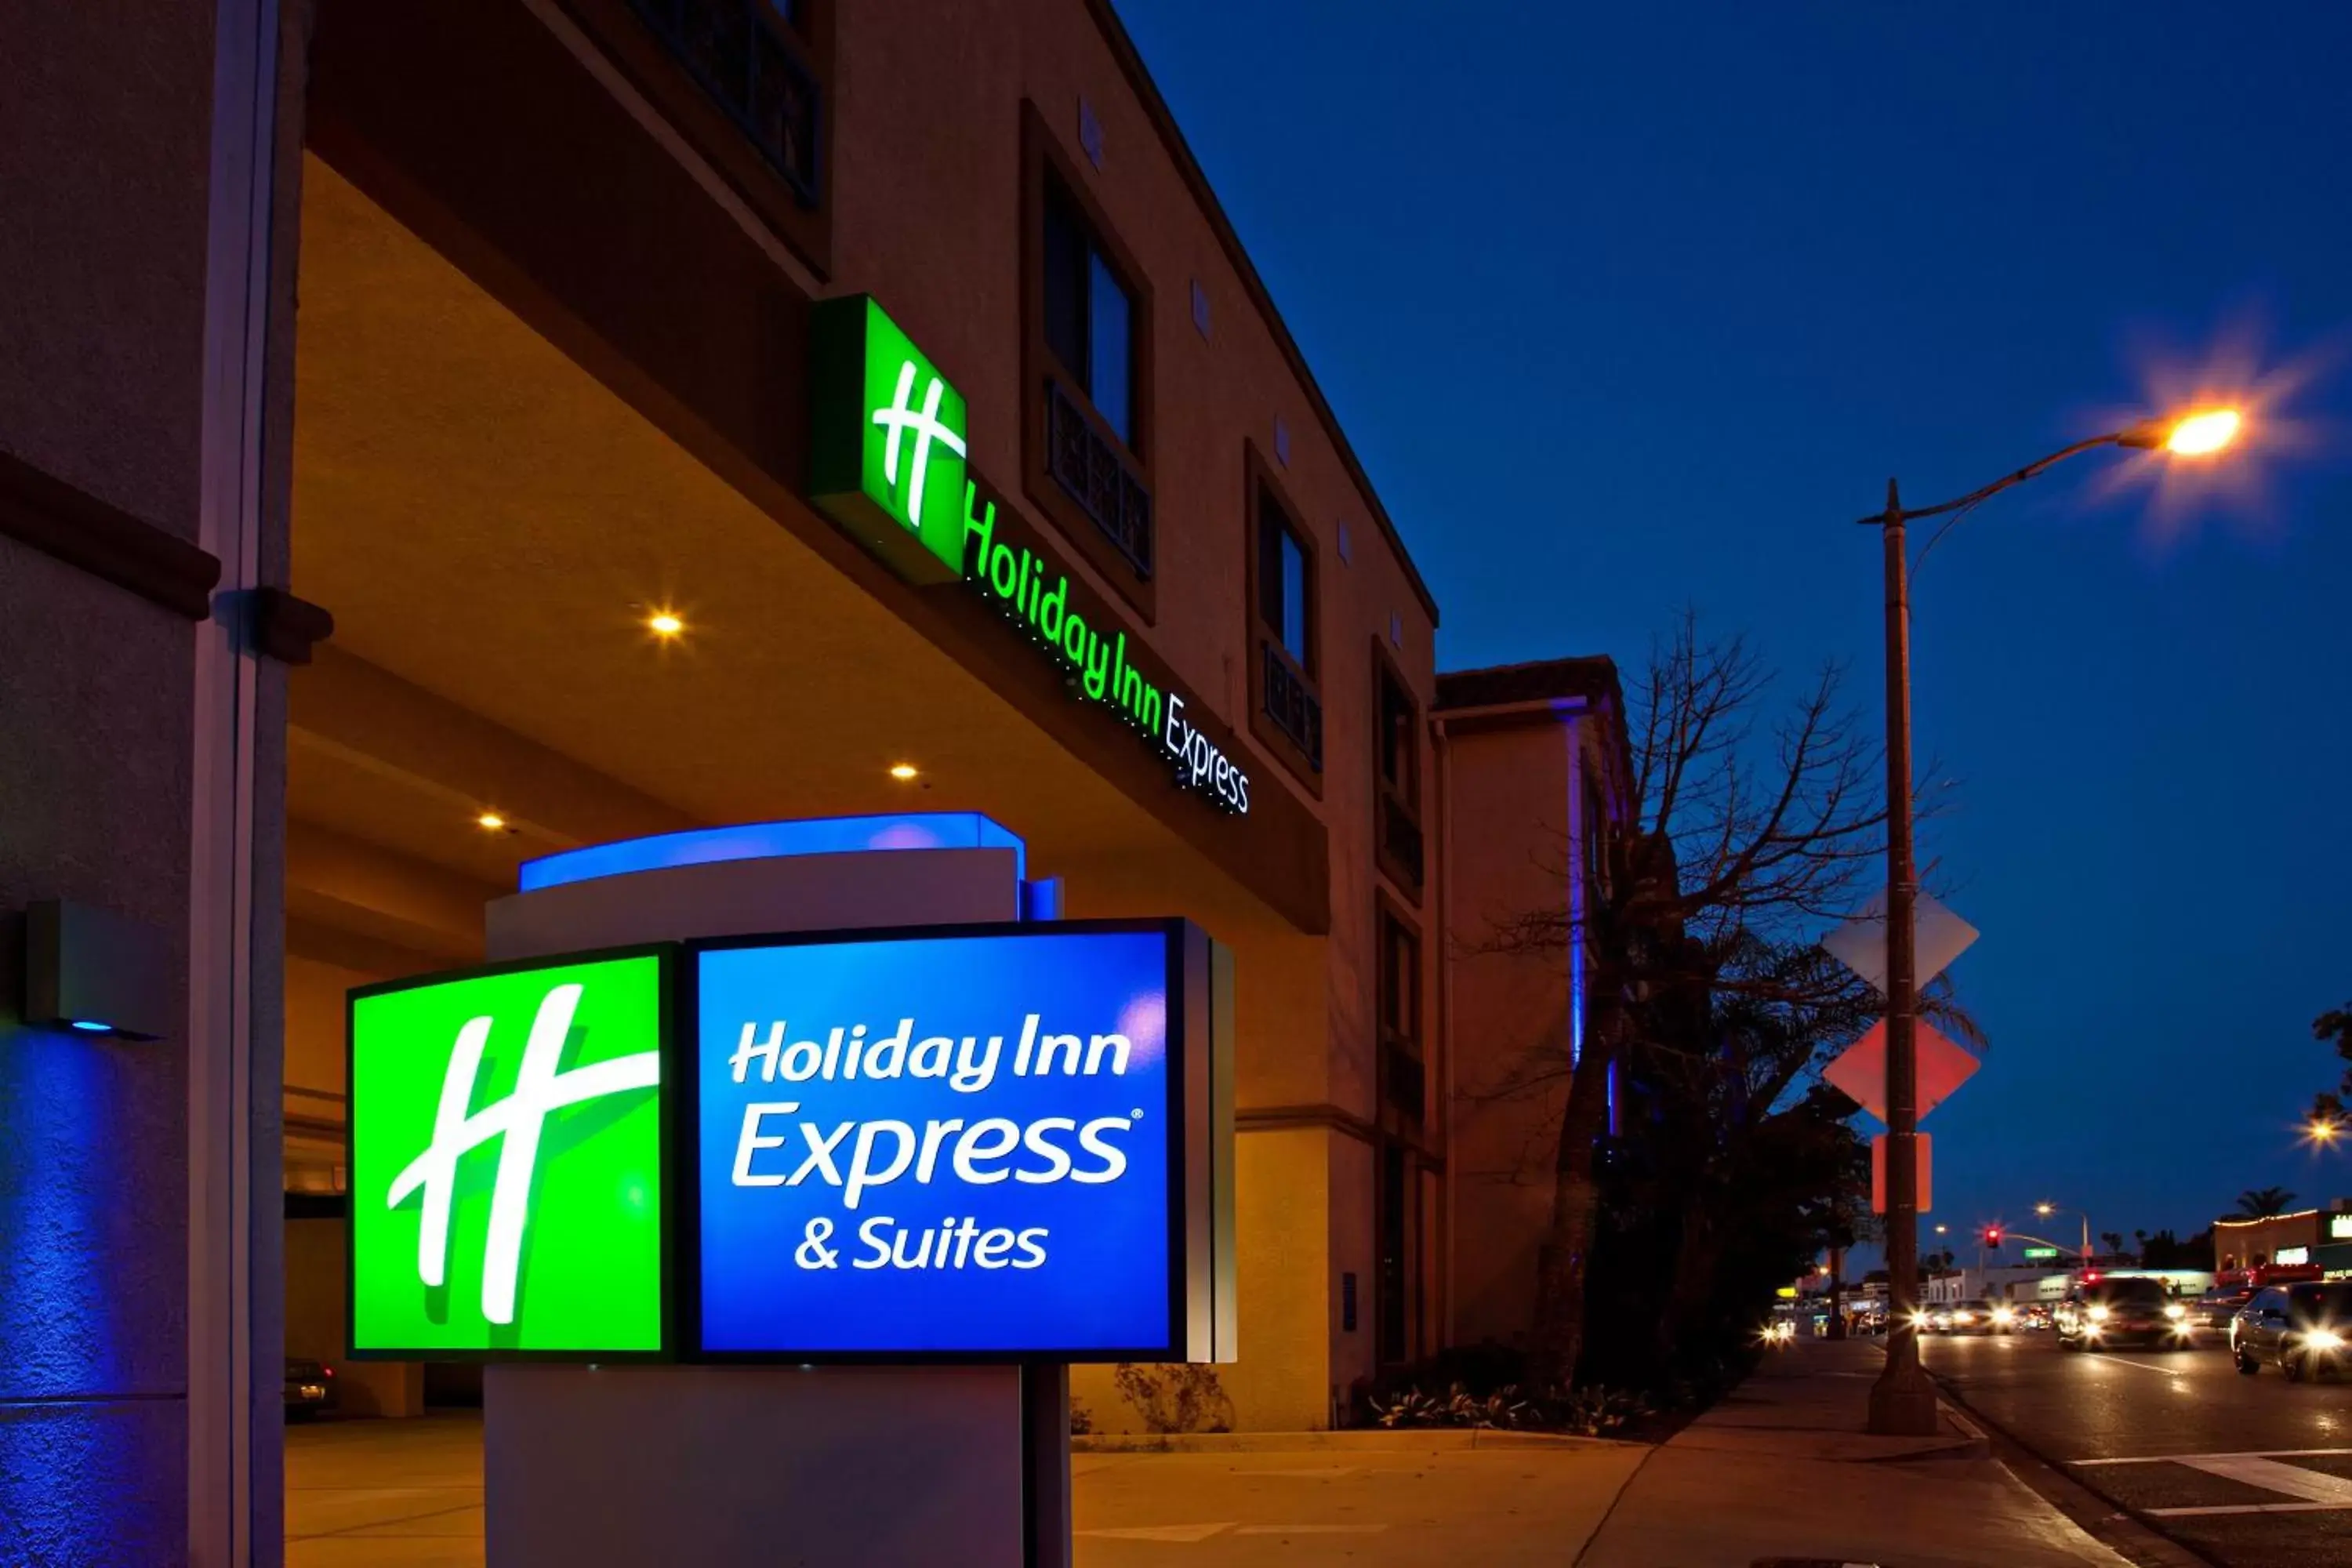 Property Building in Holiday Inn Express Hotel & Suites Hermosa Beach, an IHG Hotel